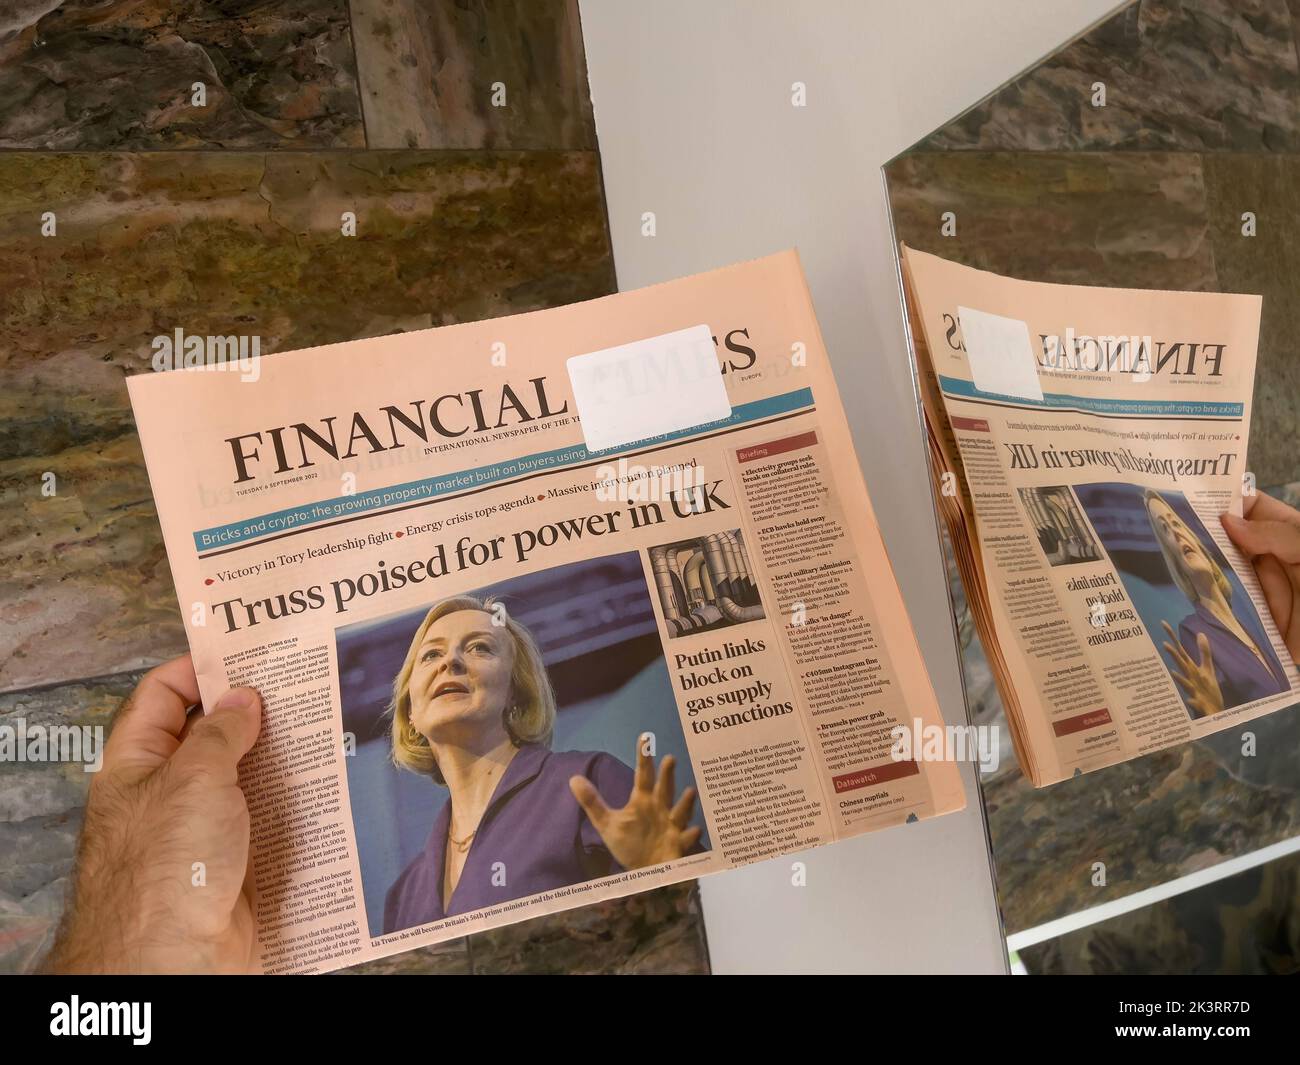 London, United Kingdom - Sep 6, 2022: Male hand holding reading latest Financial Times newspaper featuring new Prime Minister of the United Kingdom Liz Truss - reflection in mirror Stock Photo